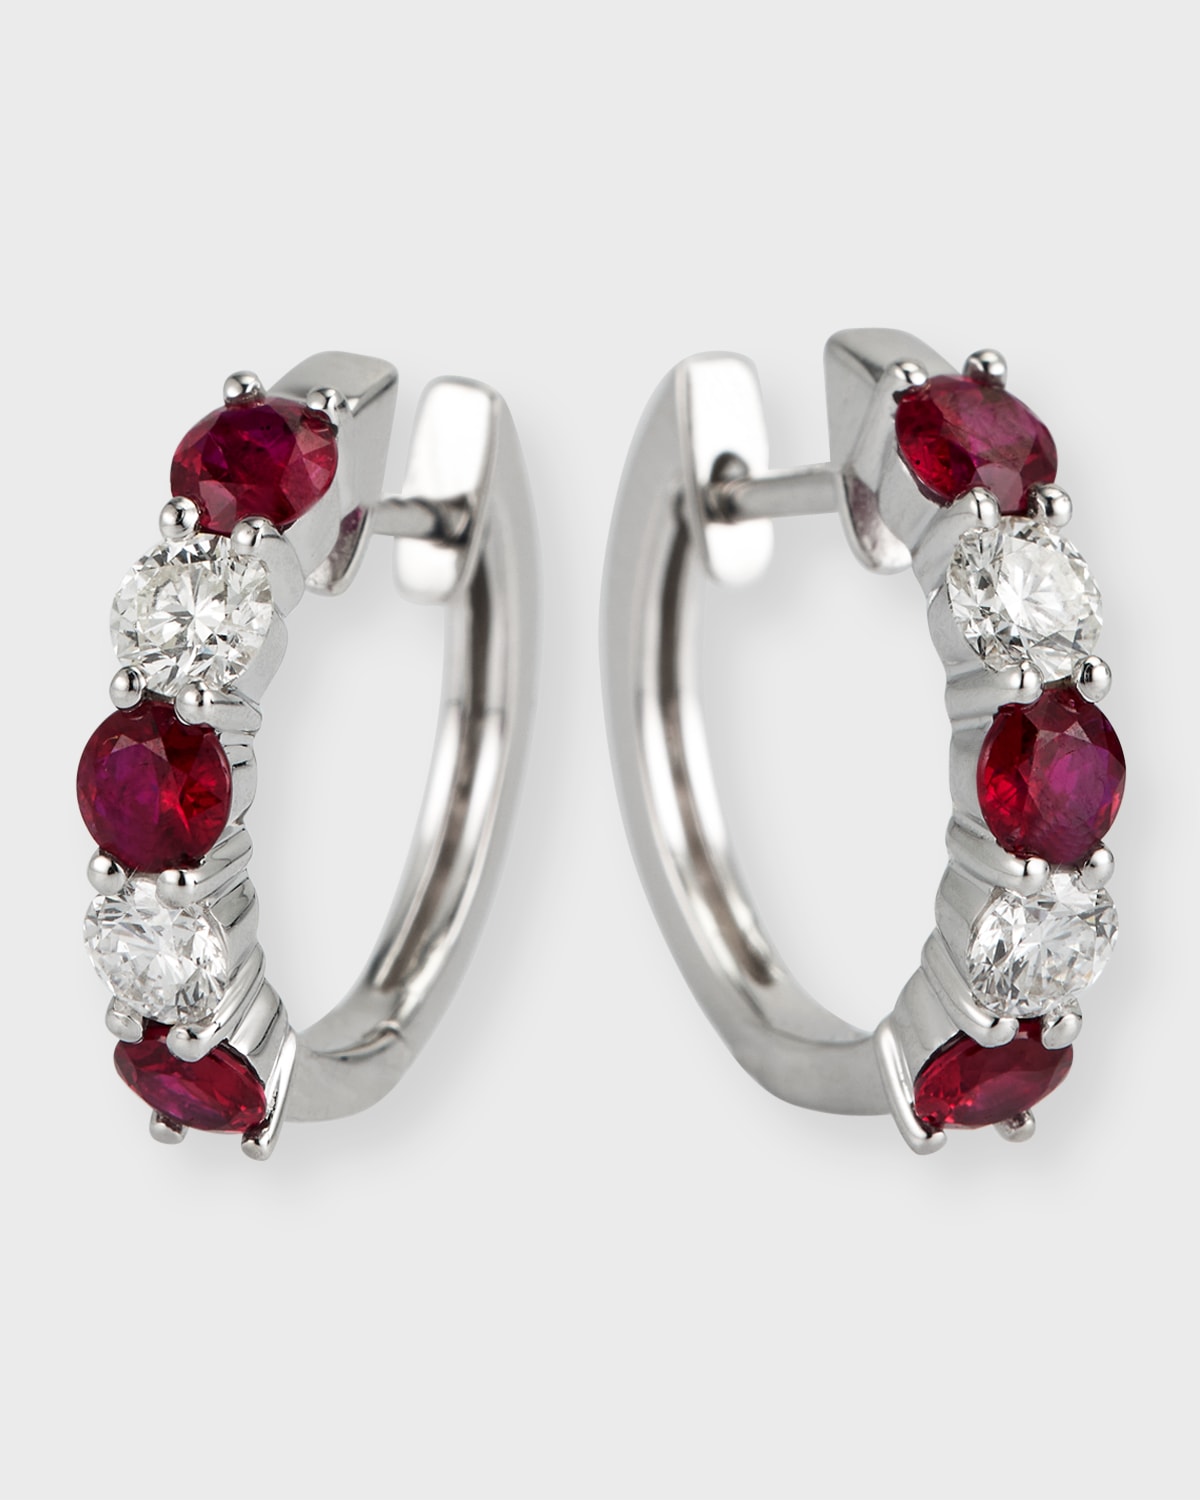 18K White Gold Earrings with 3.3mm Alternating Diamonds and Rubies